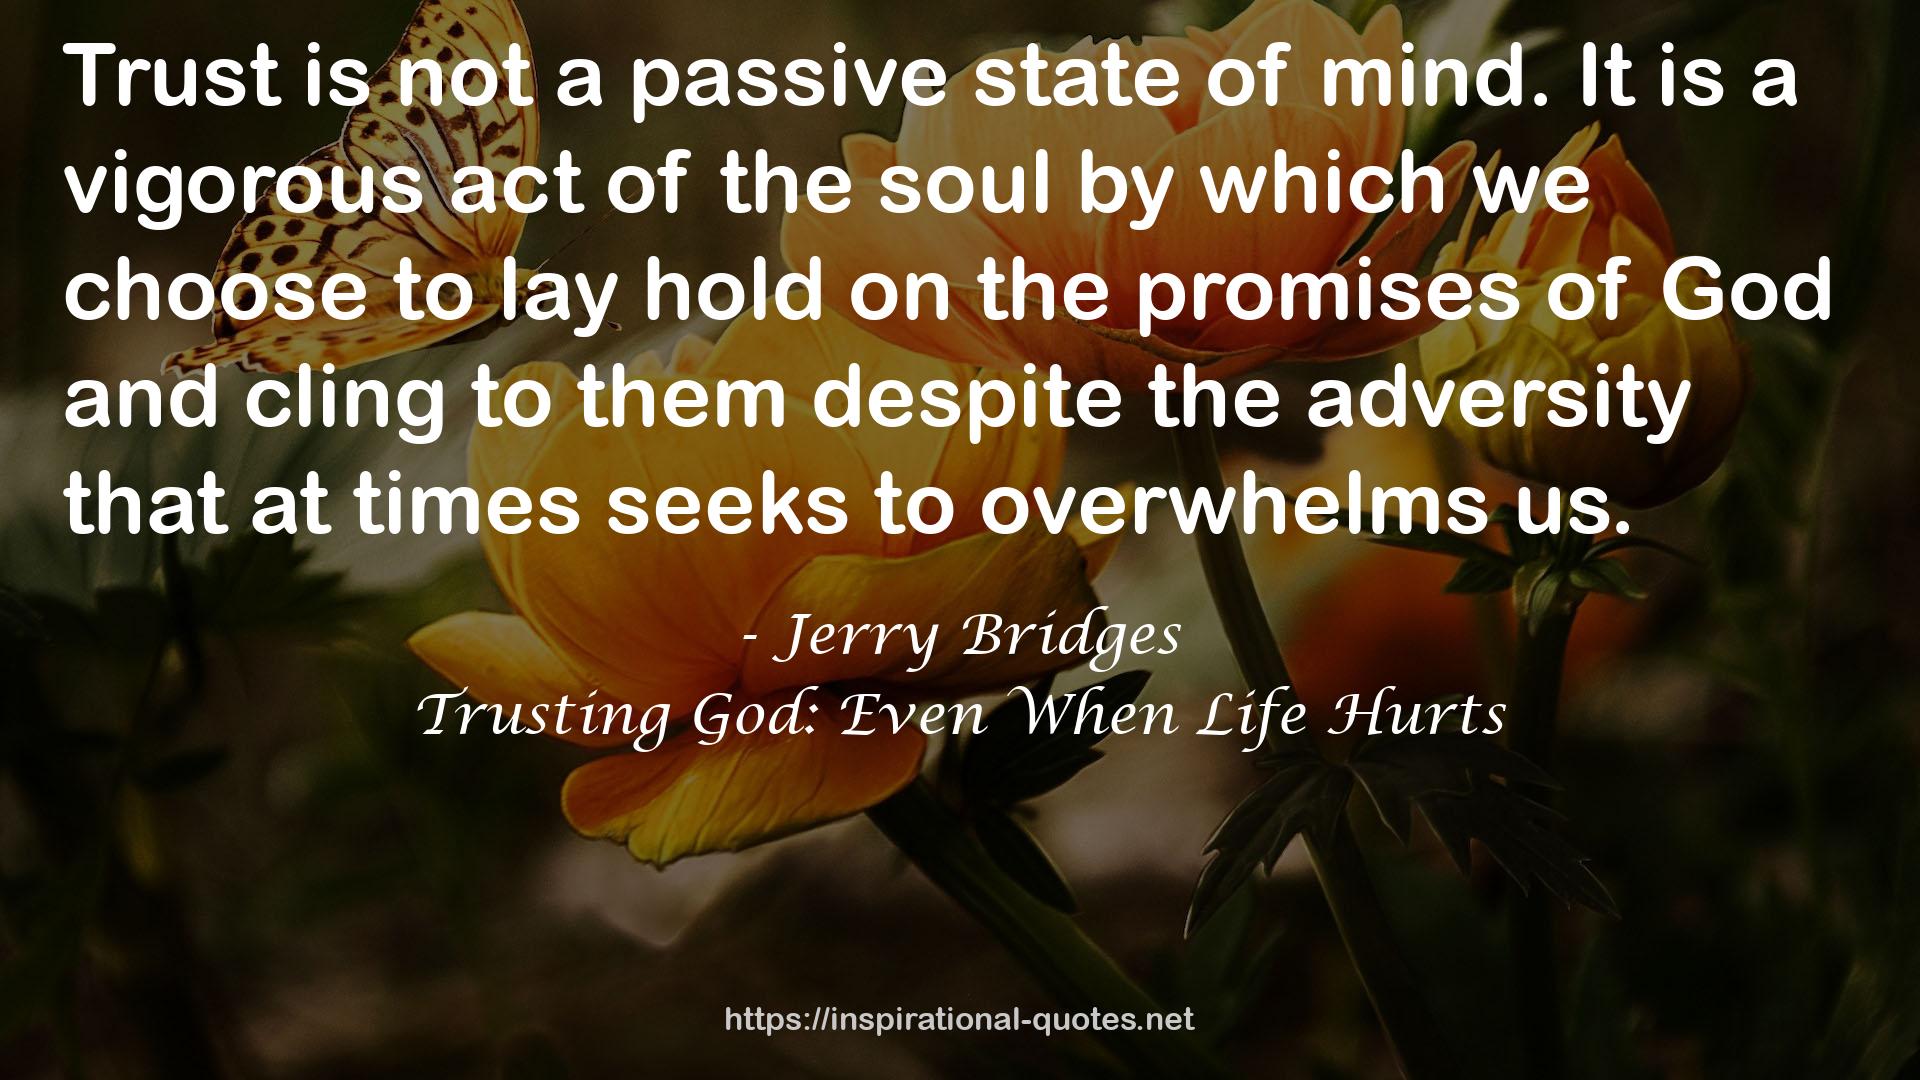 a passive state  QUOTES